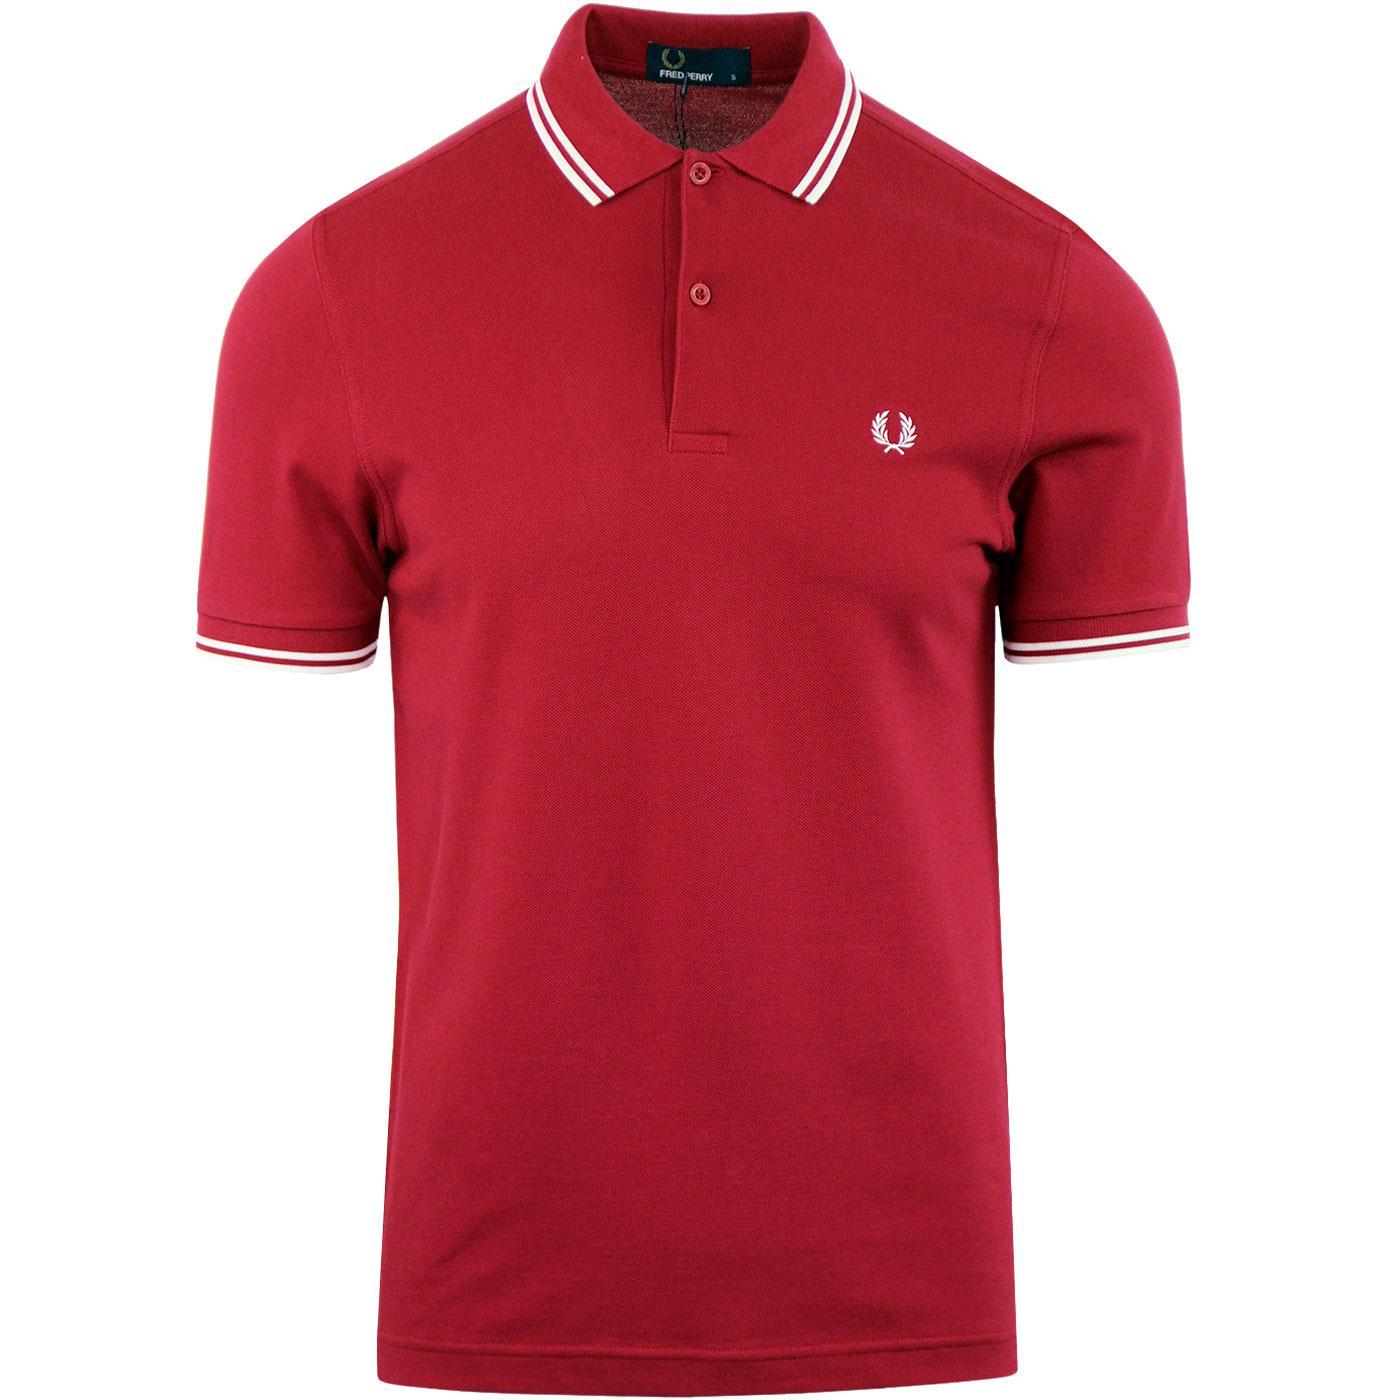 FRED PERRY M3600 Mod Twin Tipped Polo Shirt CLARET